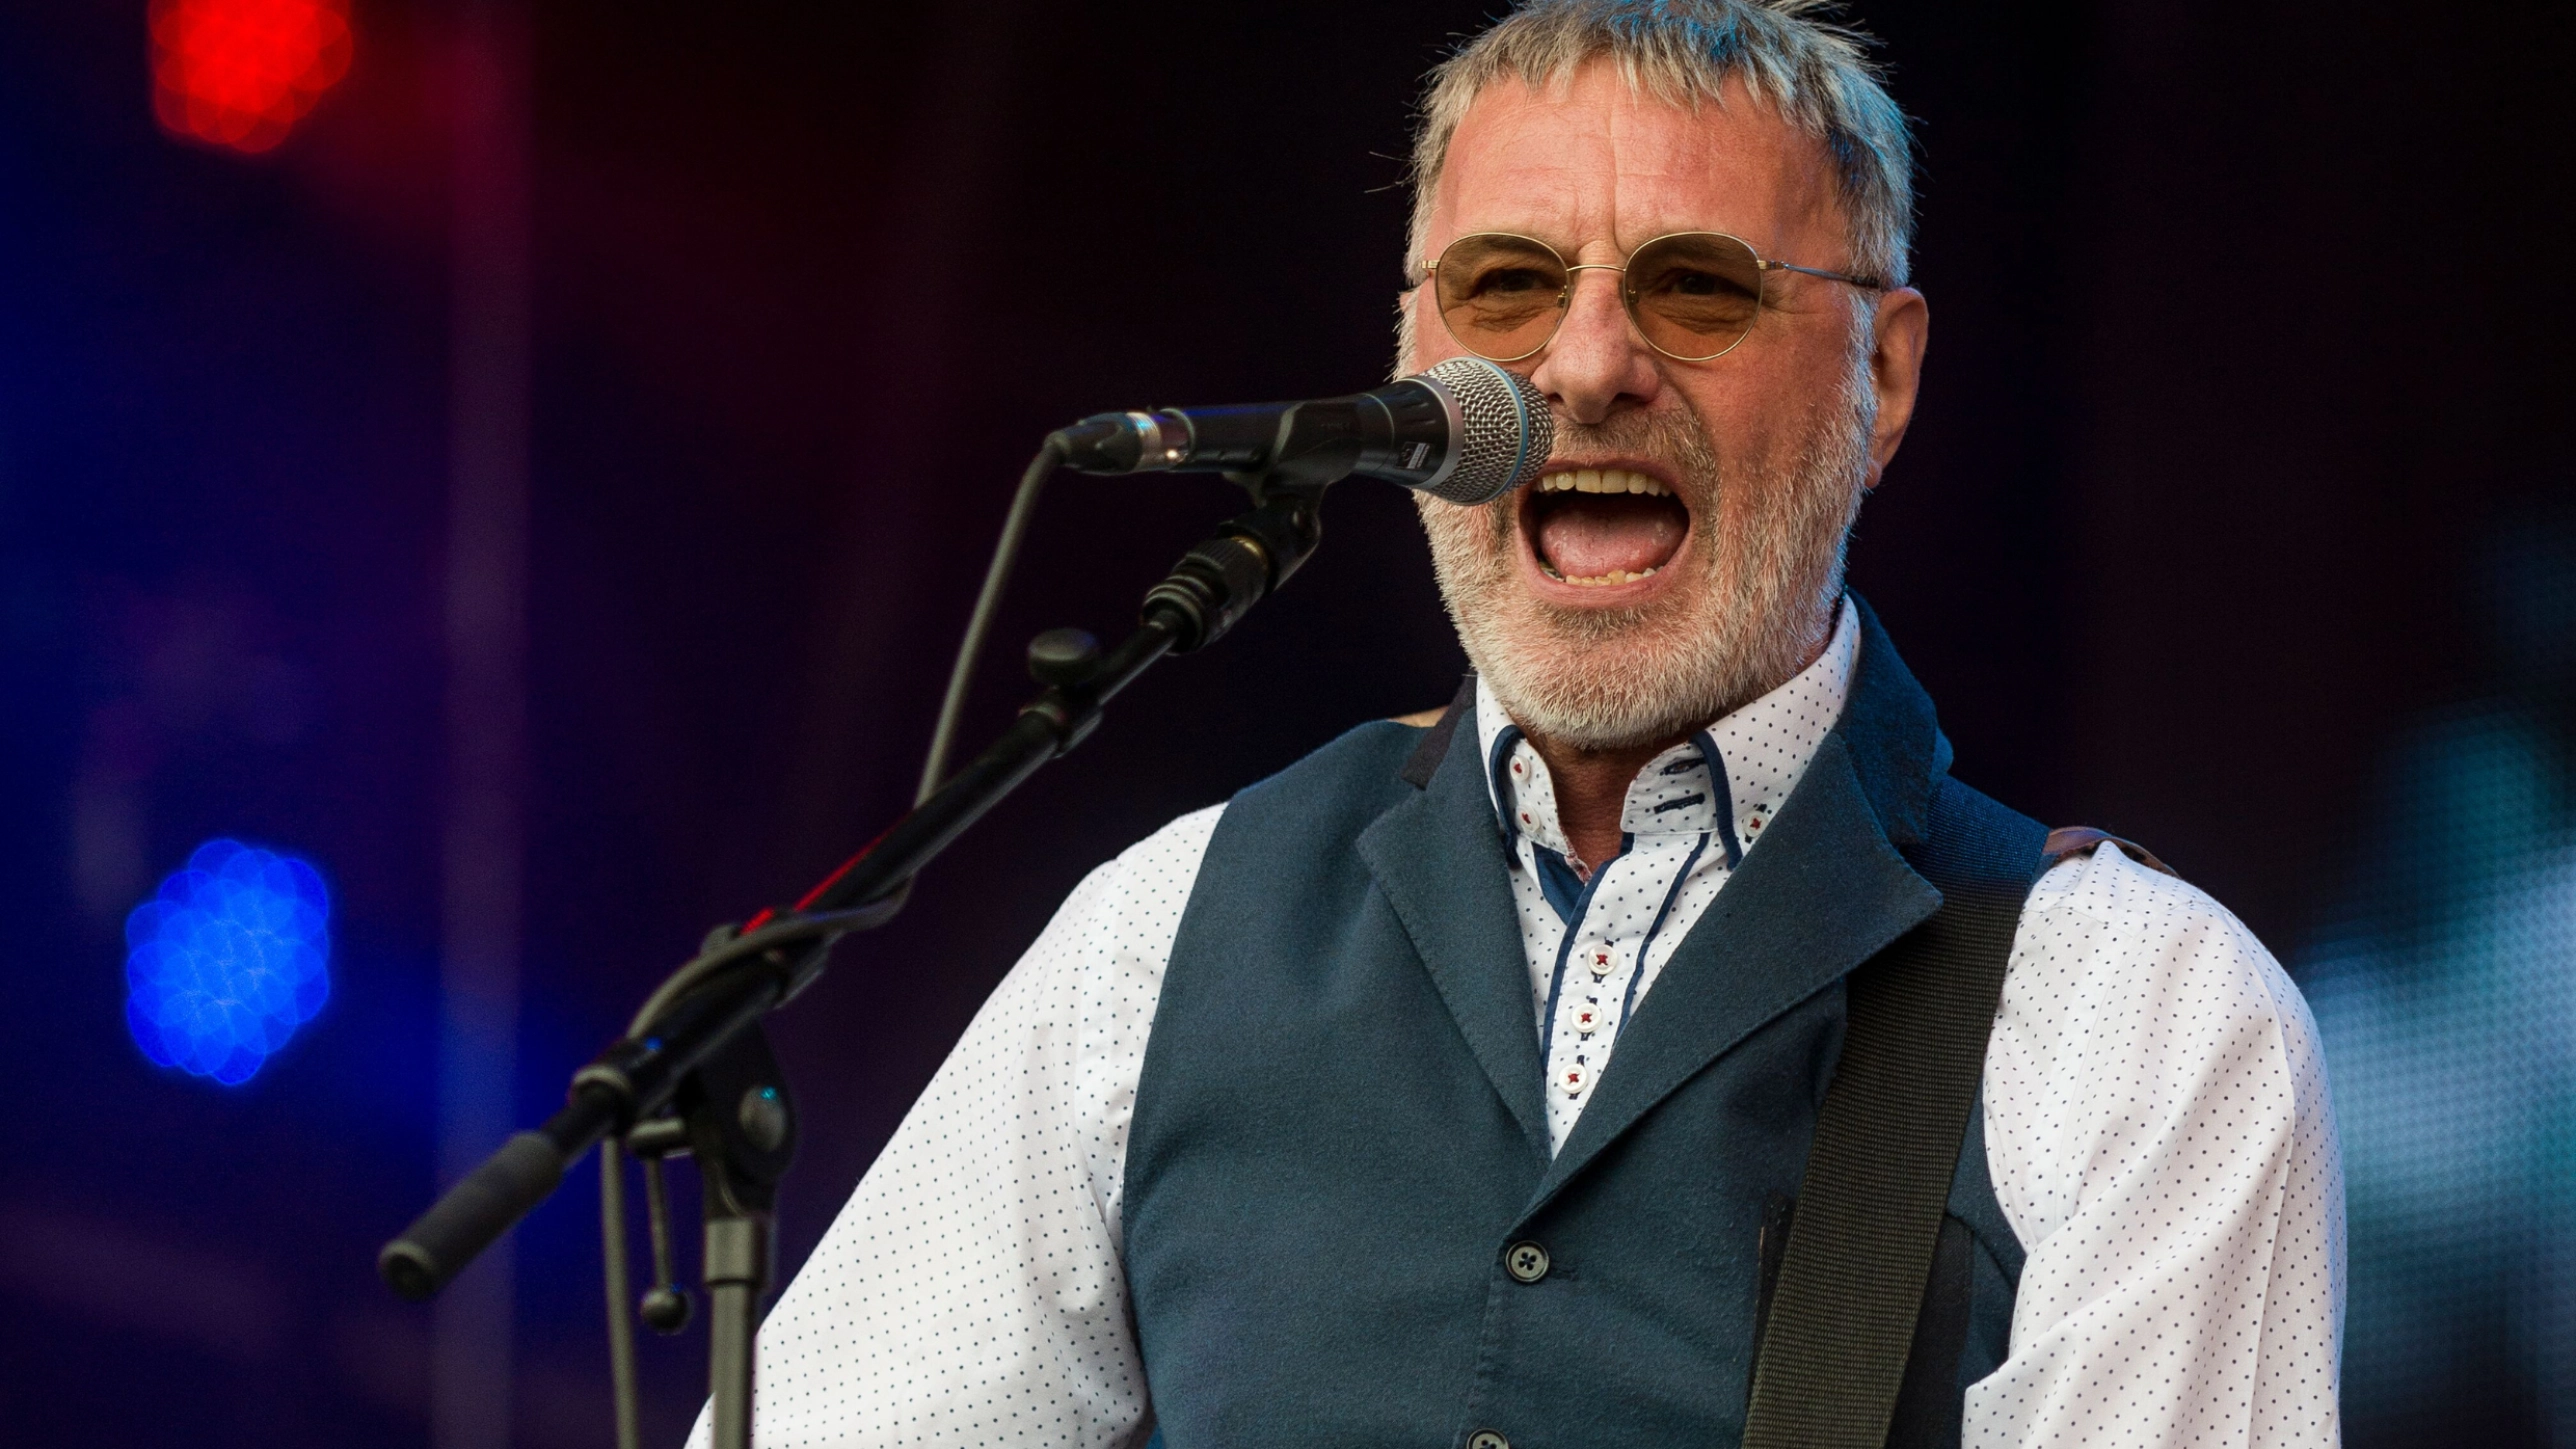 Steve Harley - Come Up And See Me, And Other Stories